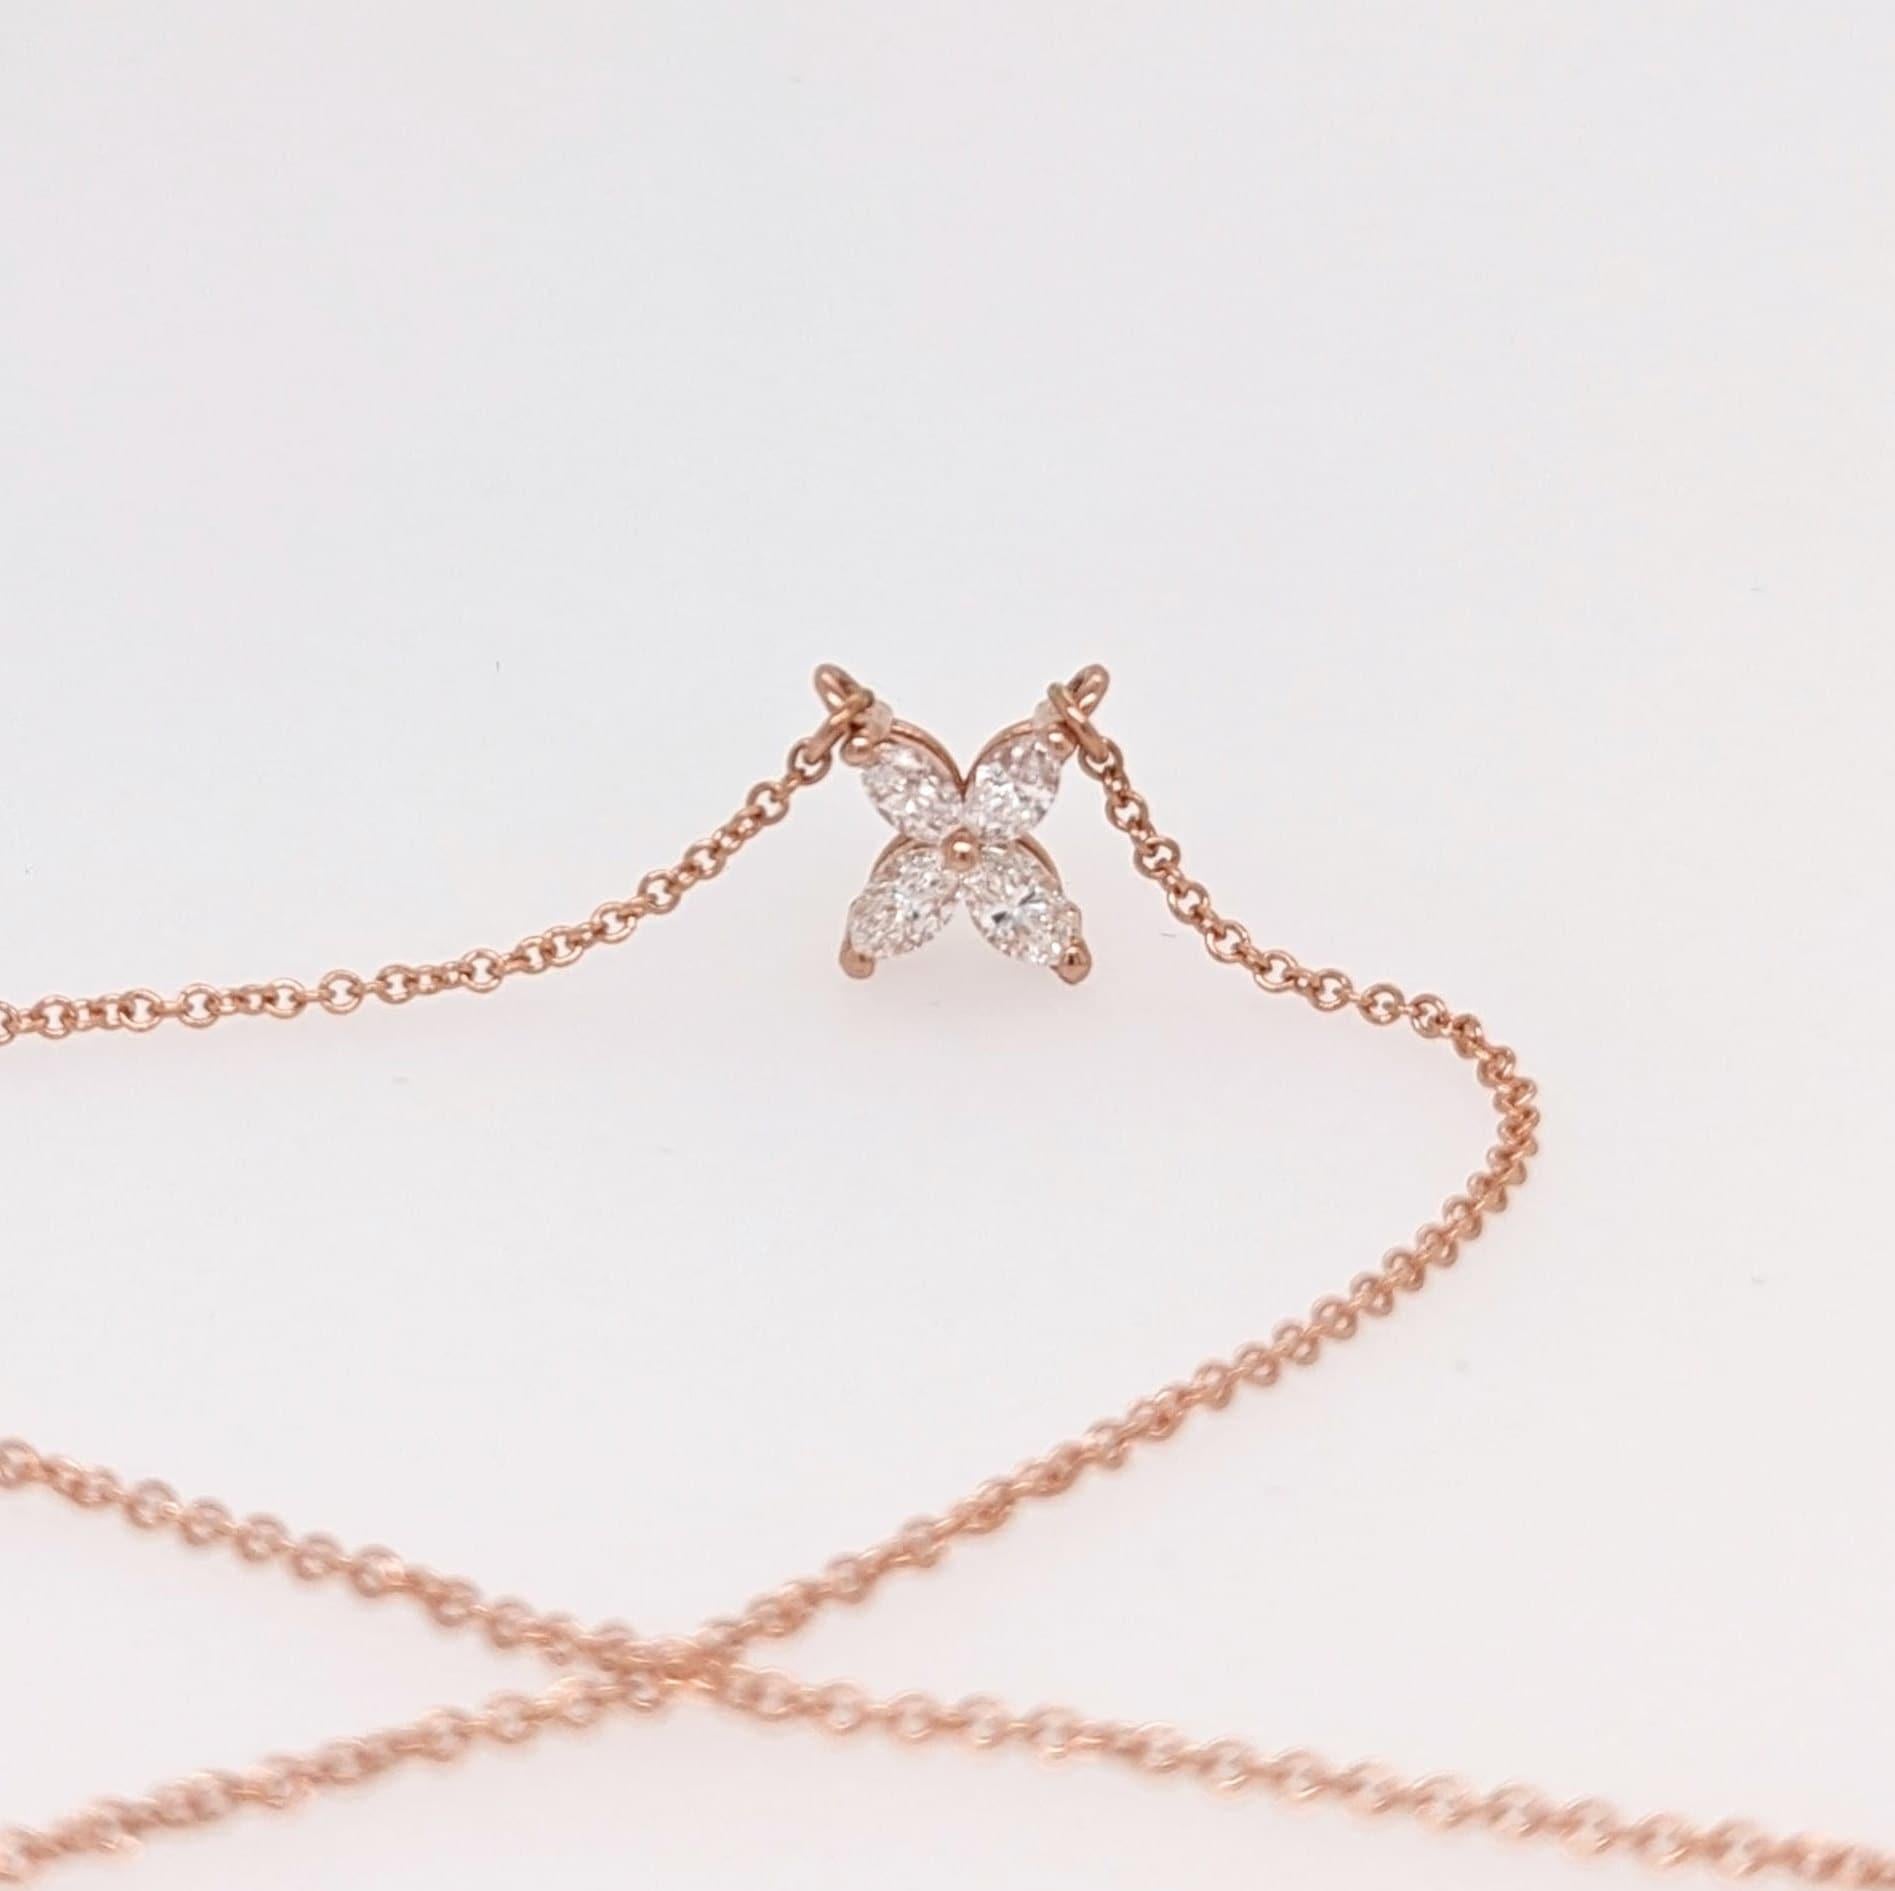 Cute Flower Shaped Pendant in Solid 14k Rose Gold with Natural Diamonds